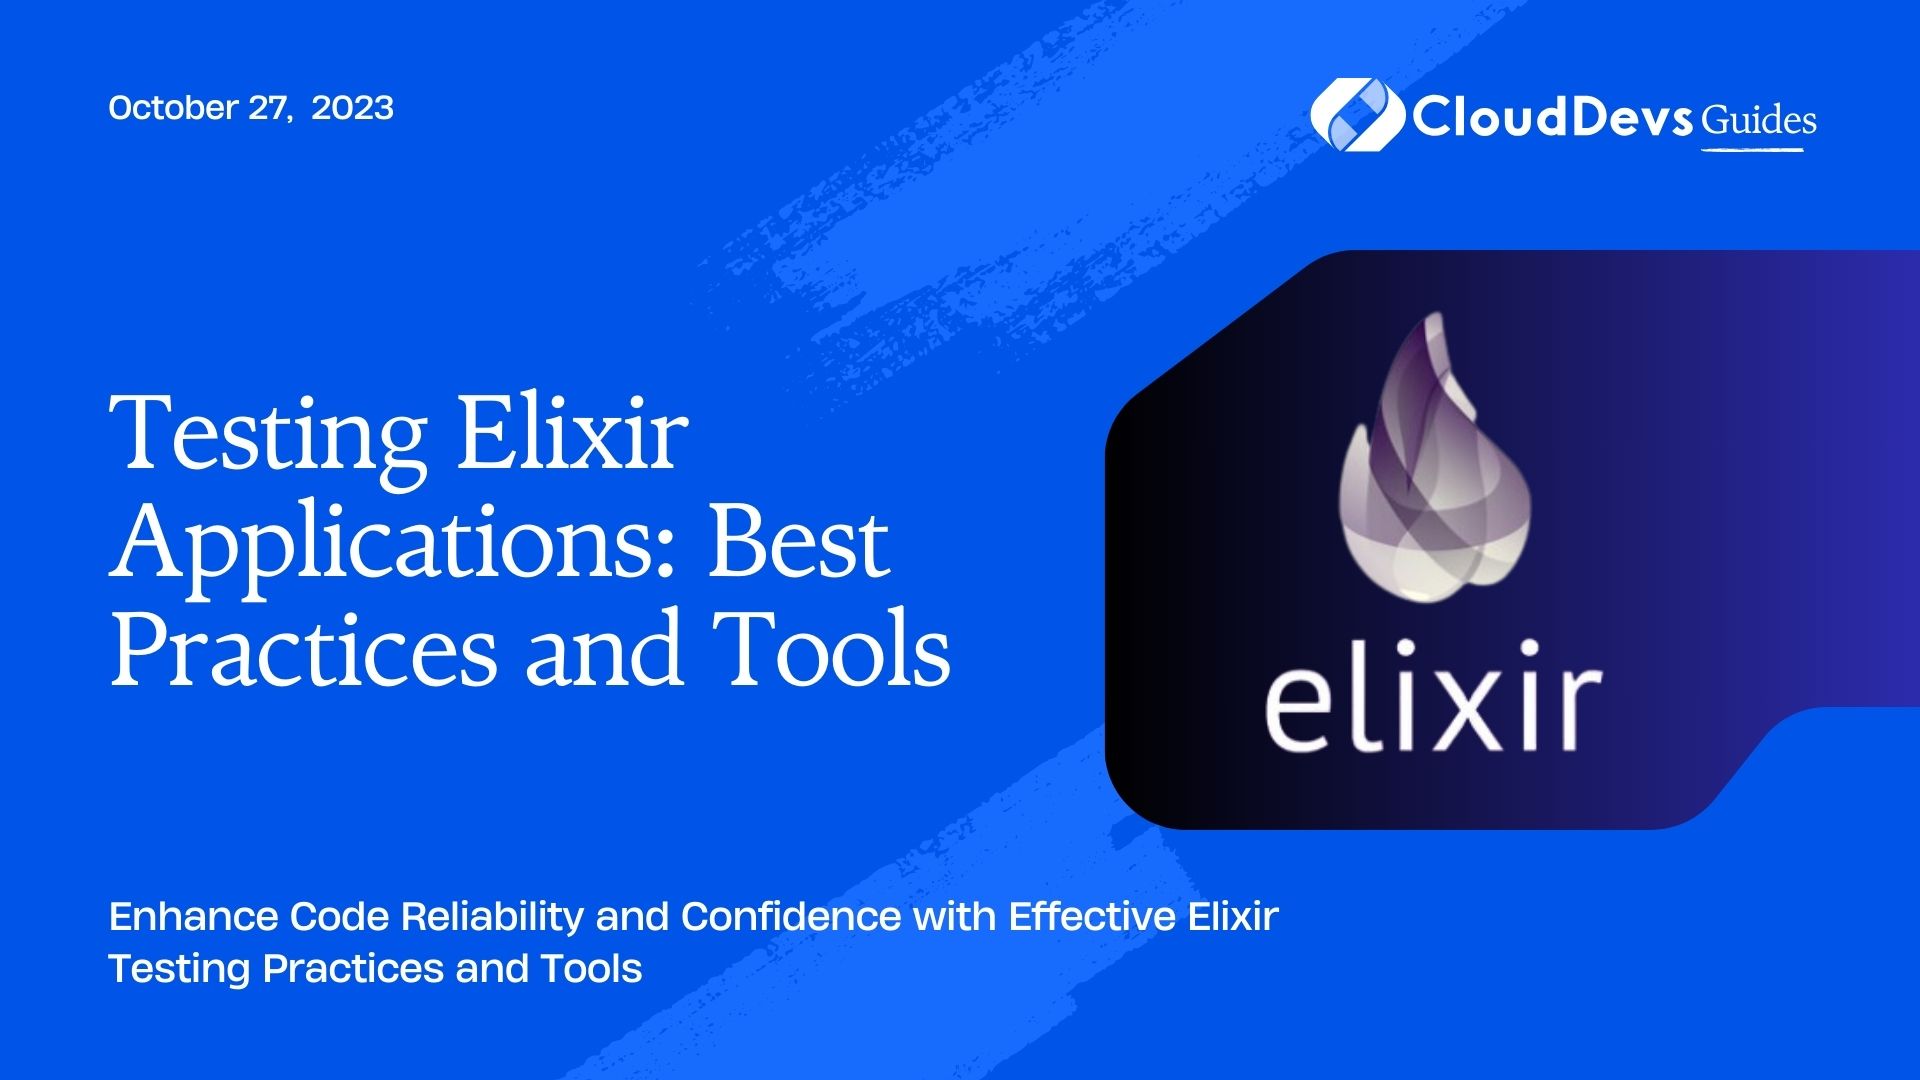 Testing Elixir Applications: Best Practices and Tools